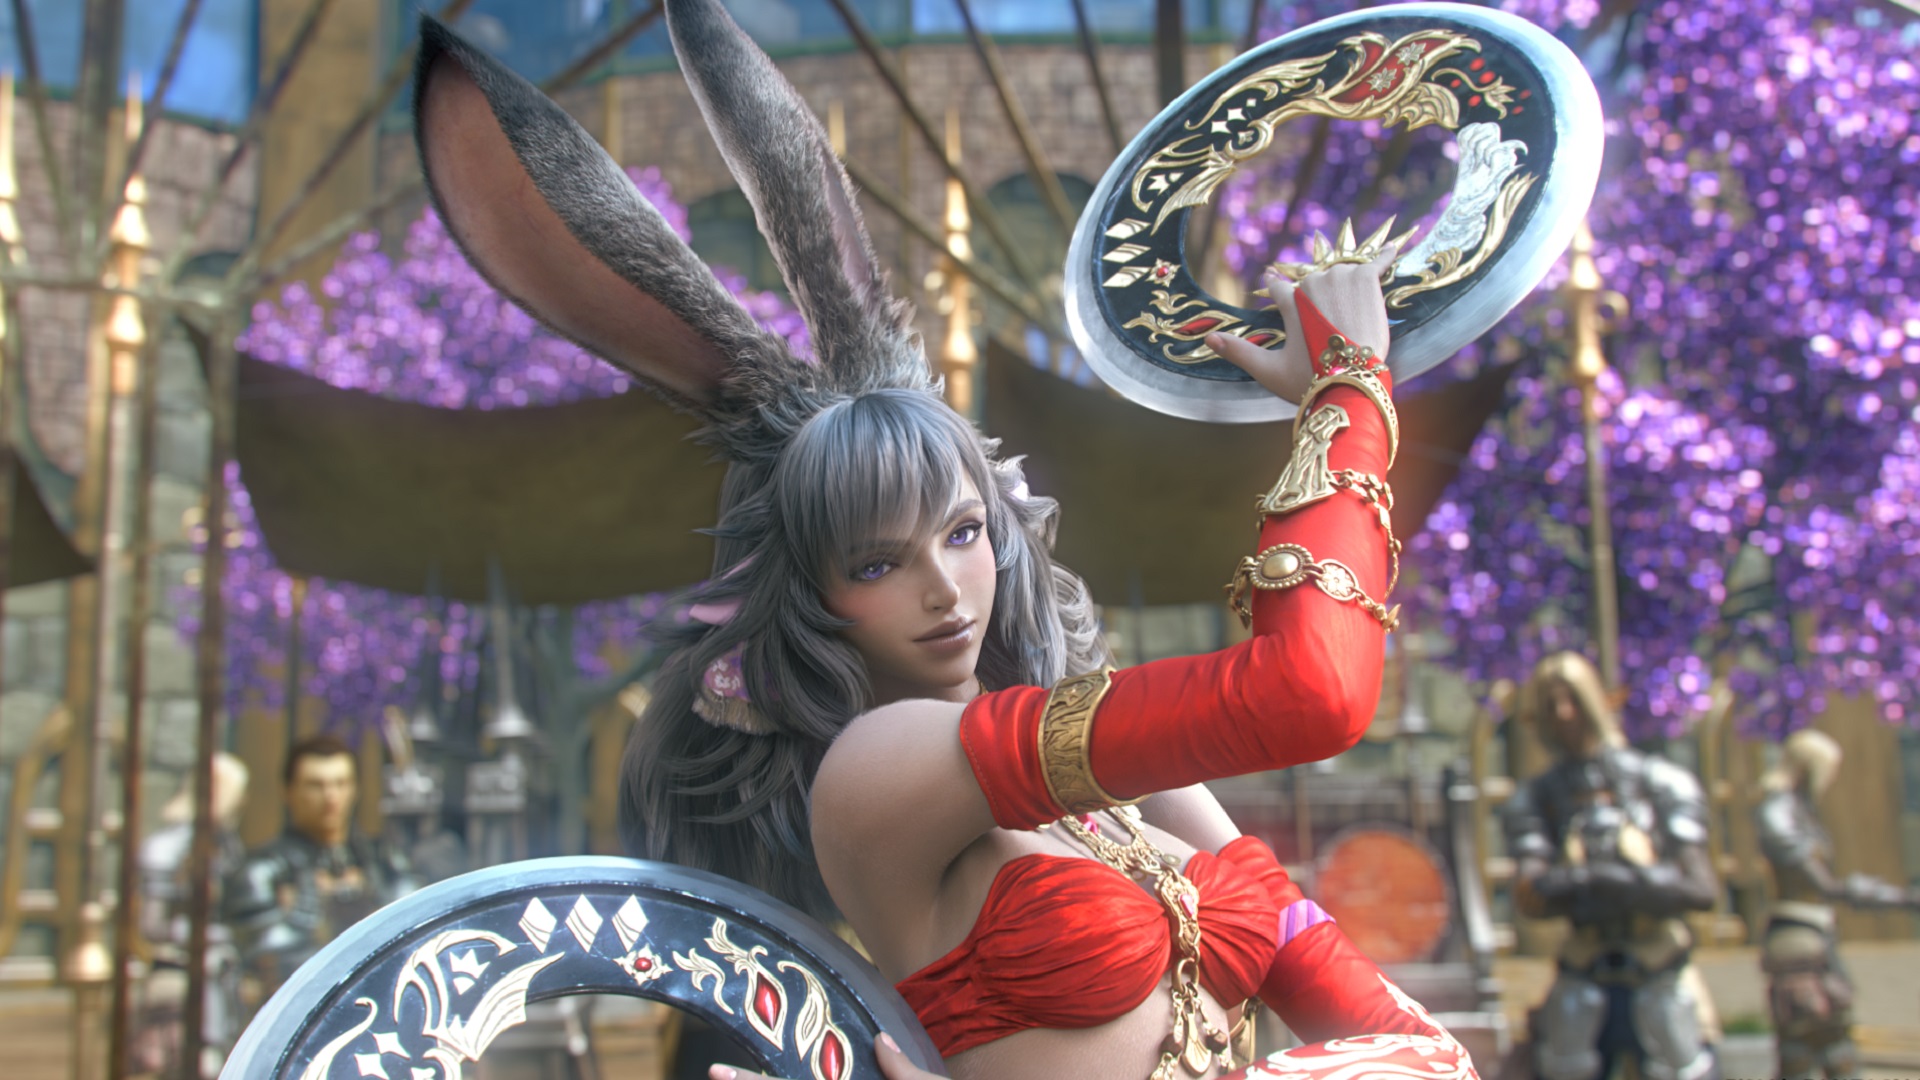 Final Fantasy XIV Dancer job guide: everything you need to know